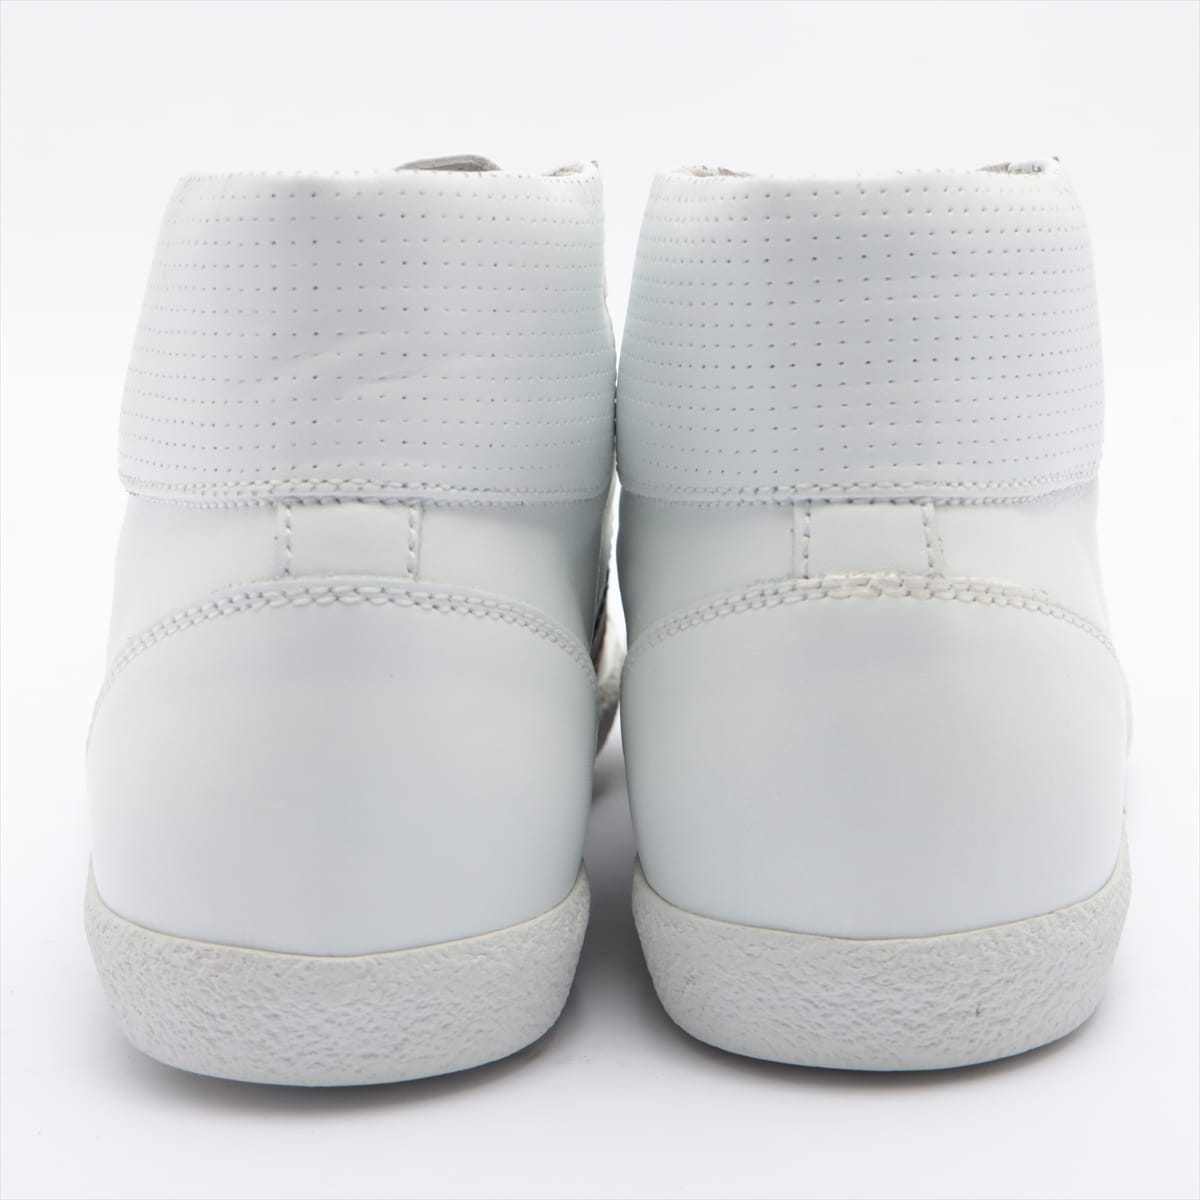 Moncler Leather High-top Sneakers 41 Men's White